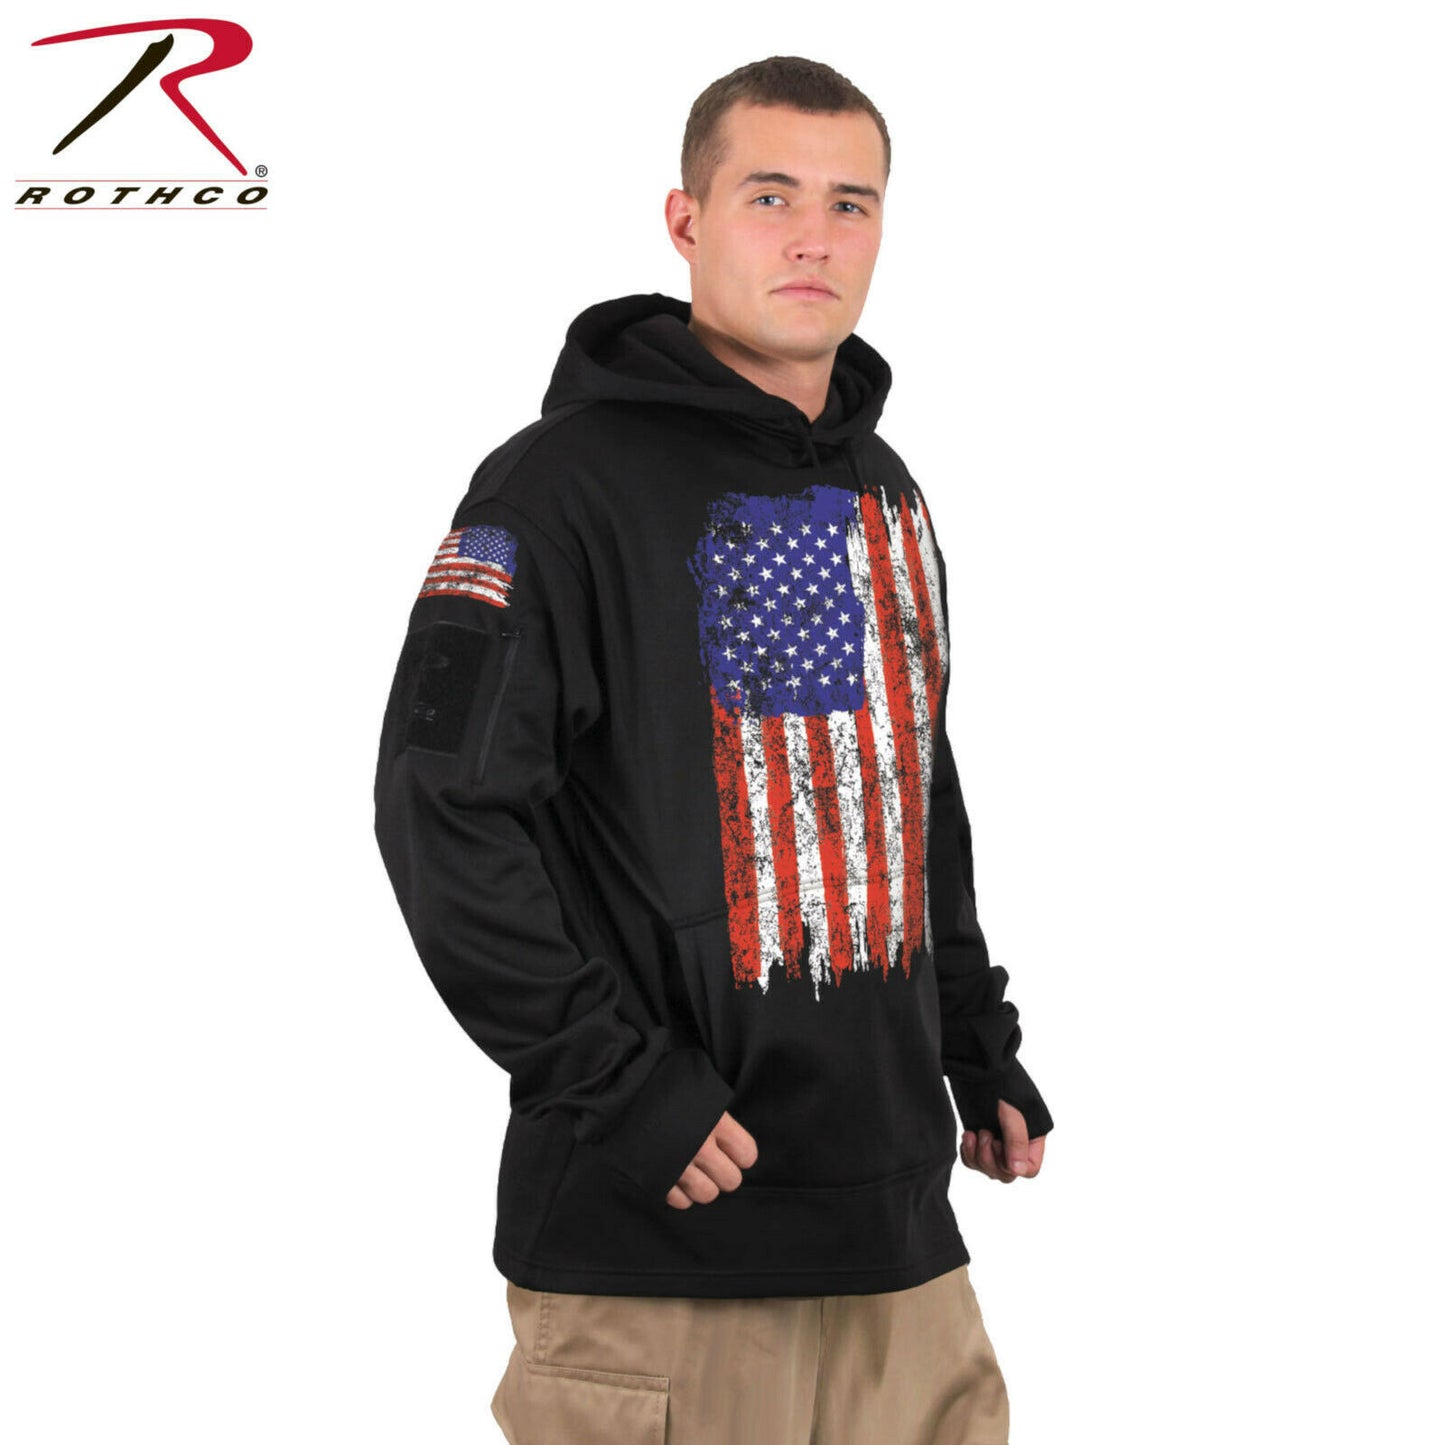 Rothco U.S. Flag Concealed Carry Black Pullover Hoodie